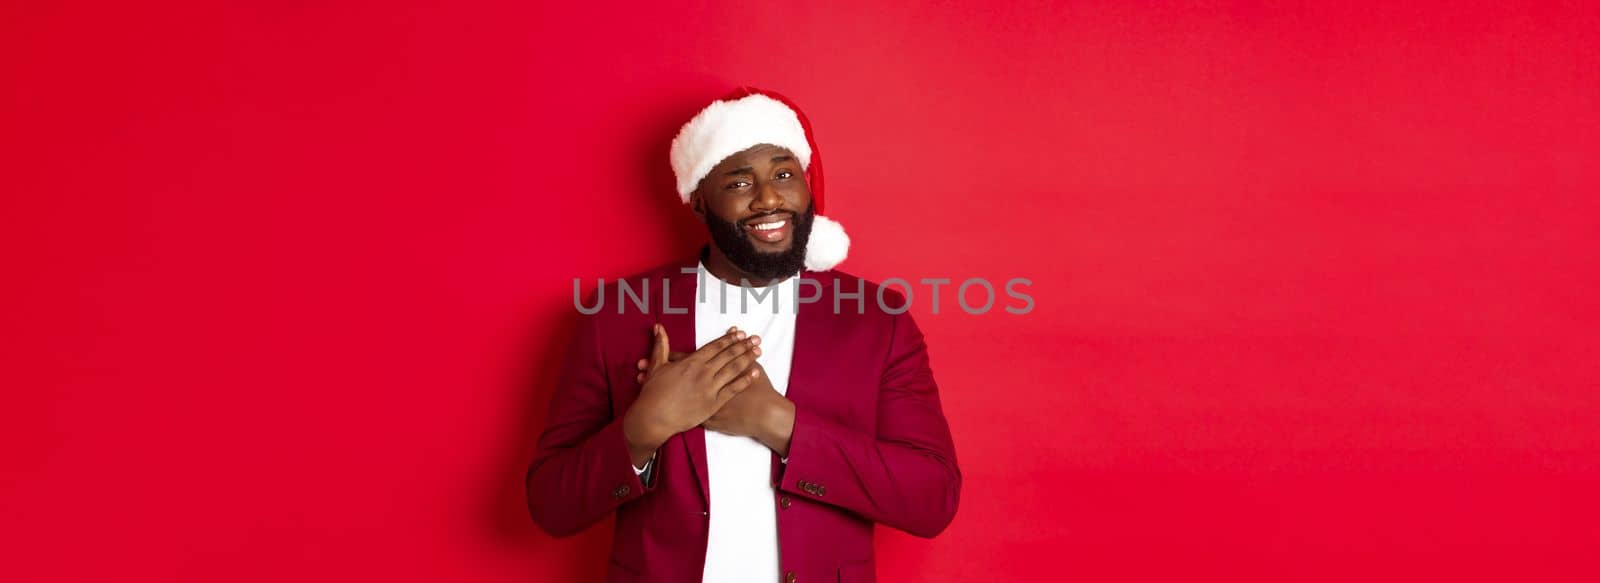 Christmas, party and holidays concept. Grateful african american man in santa hat saying thank you, holding hands on heart and smiling, feeling touched, standing against red background.